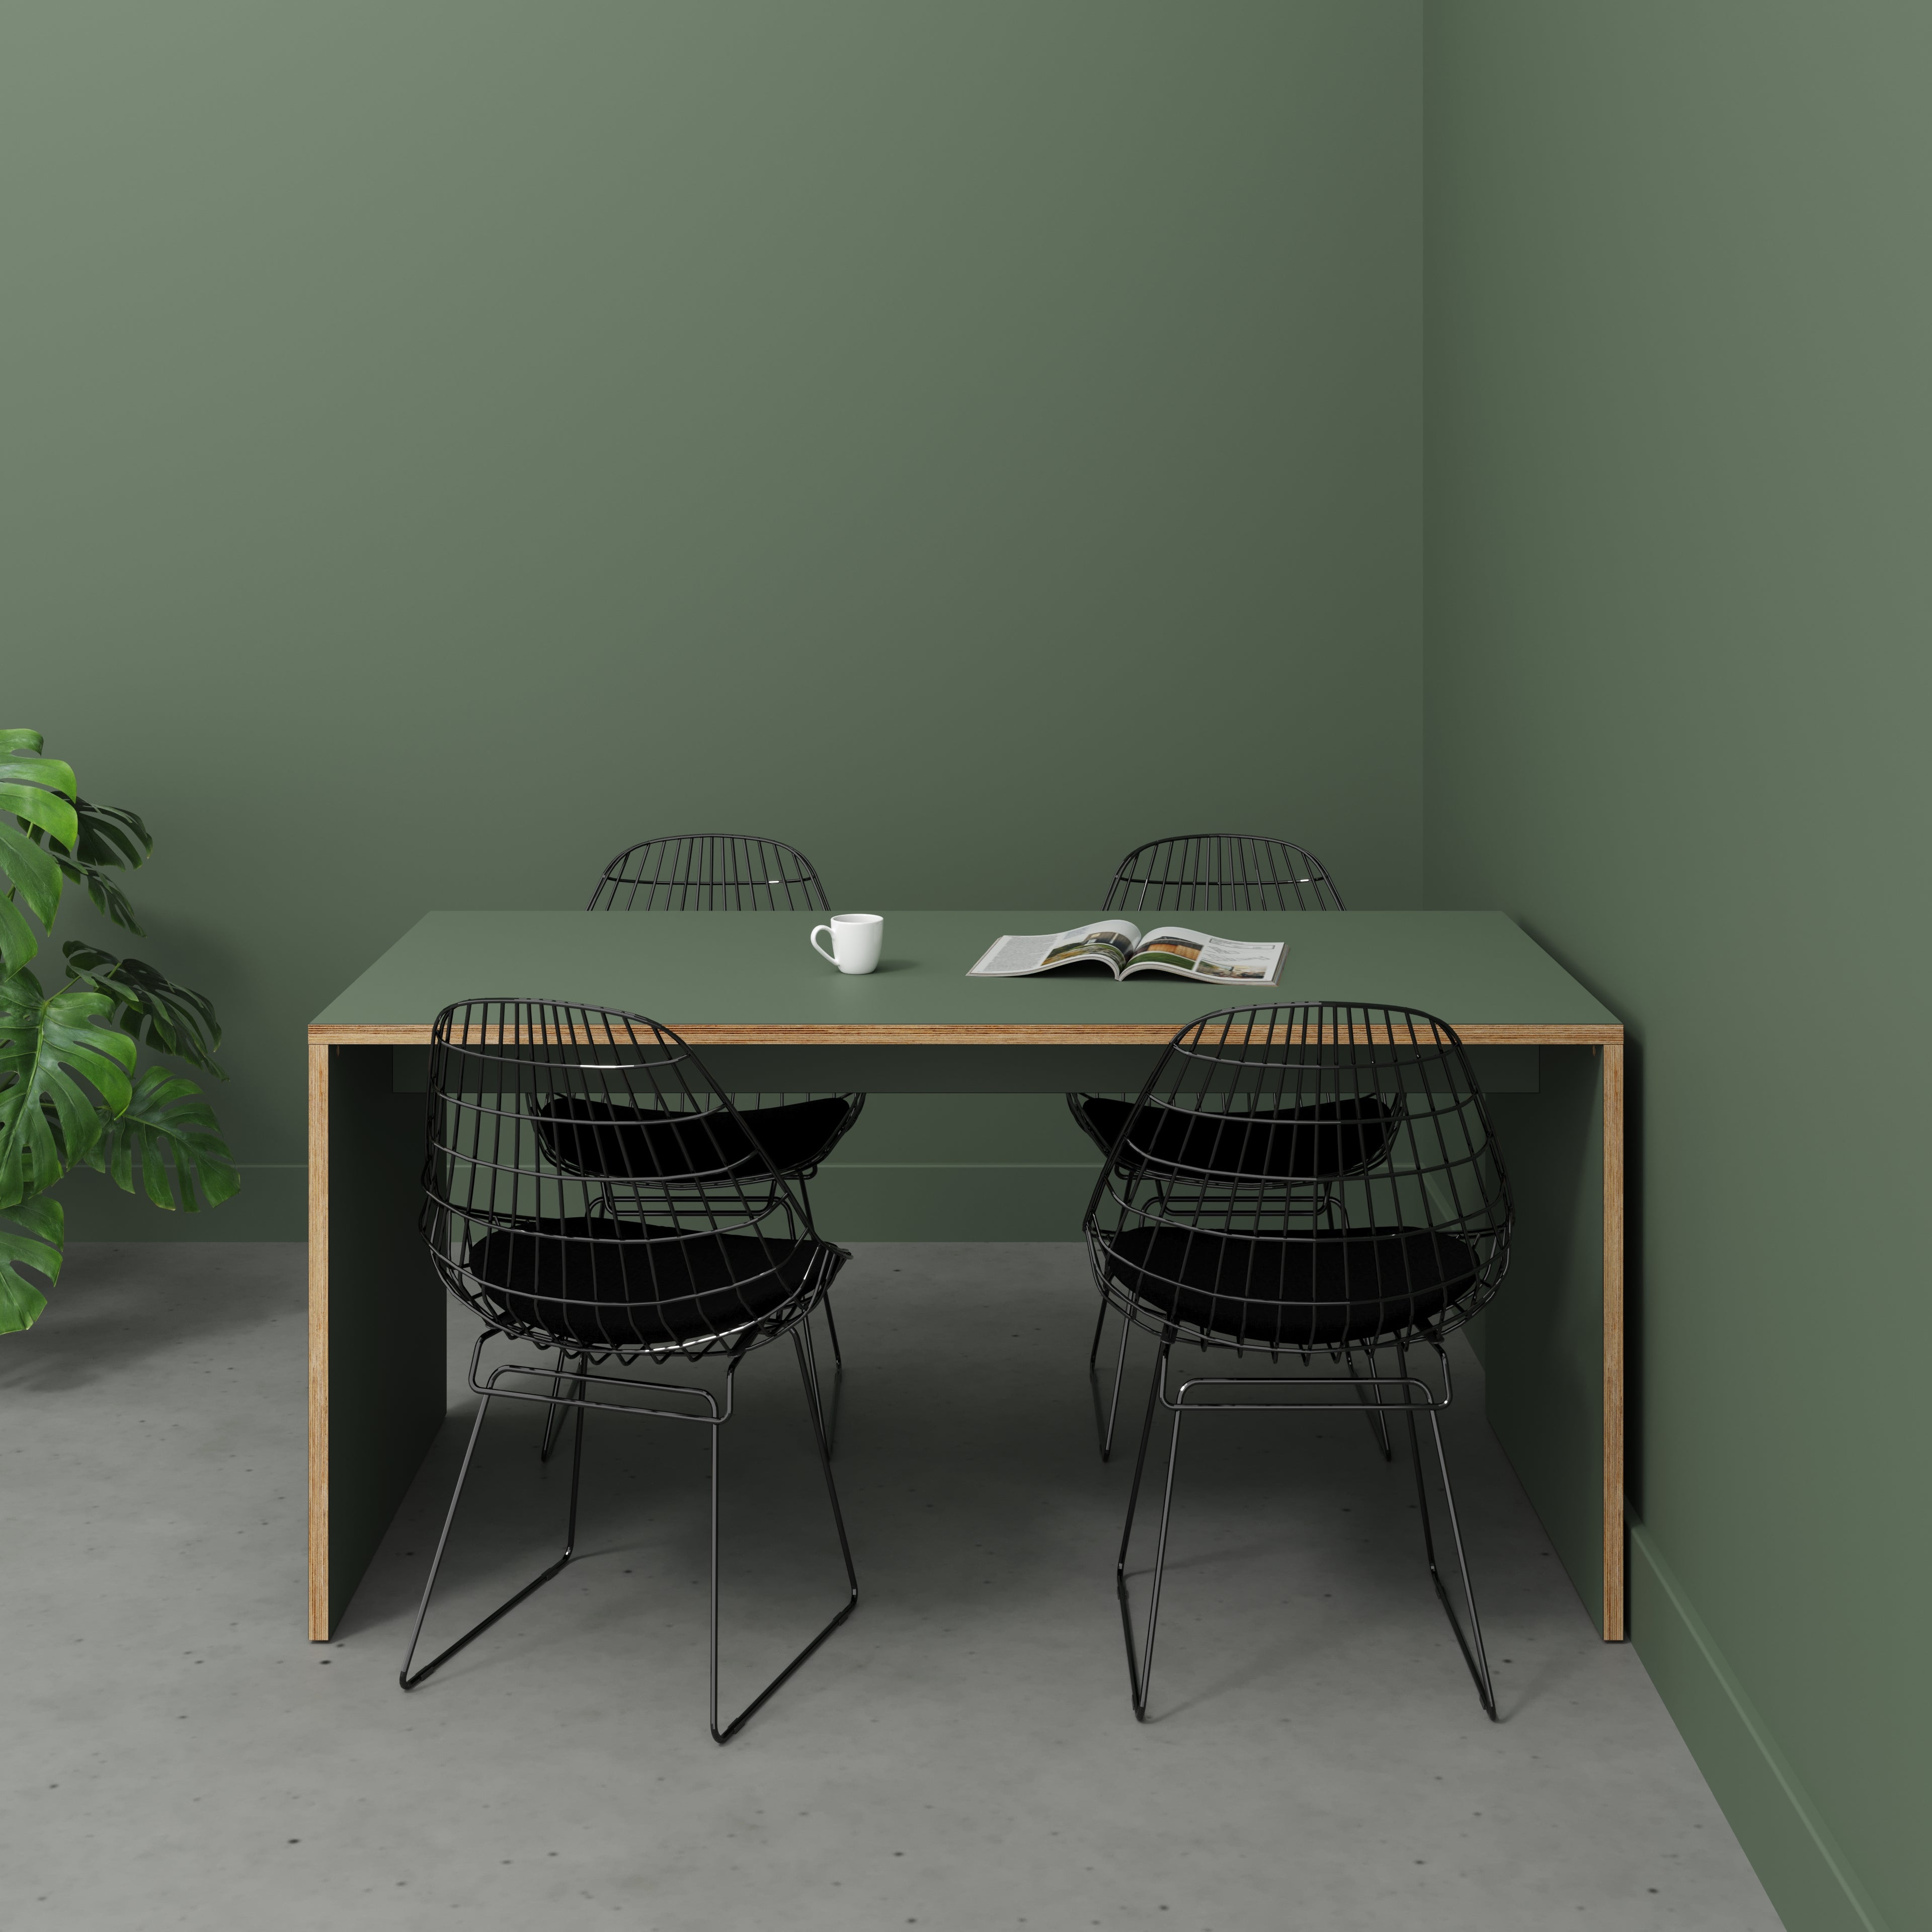 Table with Solid Sides - Formica Green Slate - 1600(w) x 800(d) x 750(h)